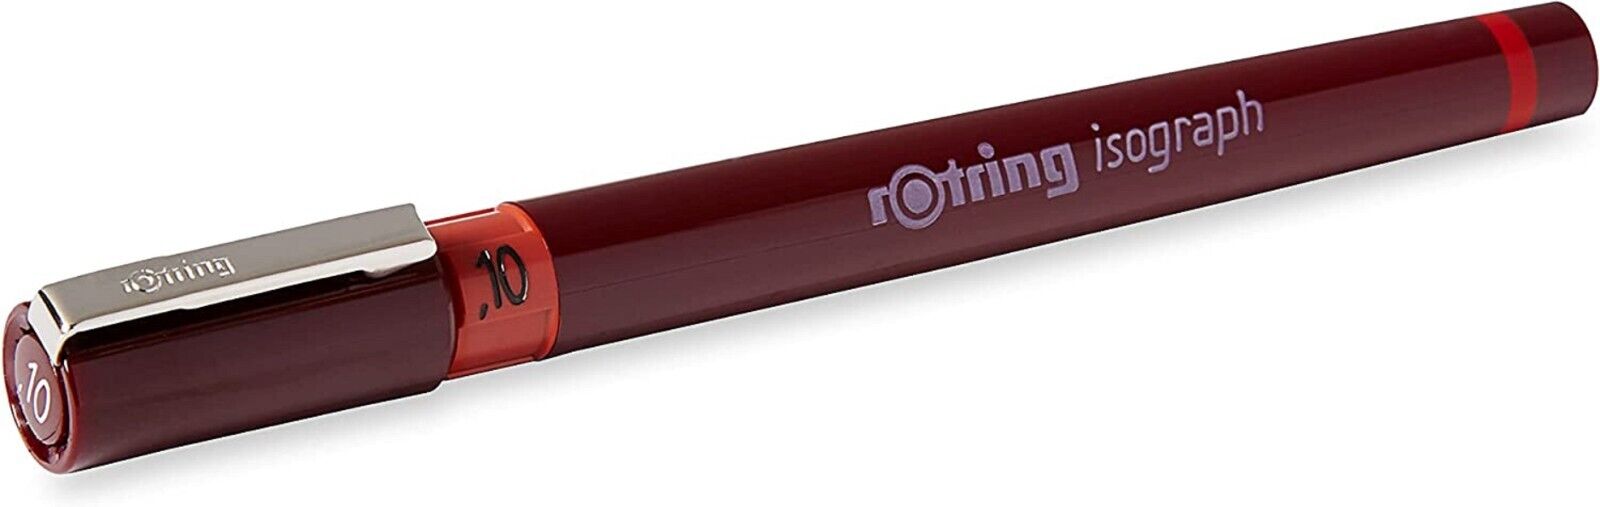 Rotring 0.10mm Isograph Technical Pen